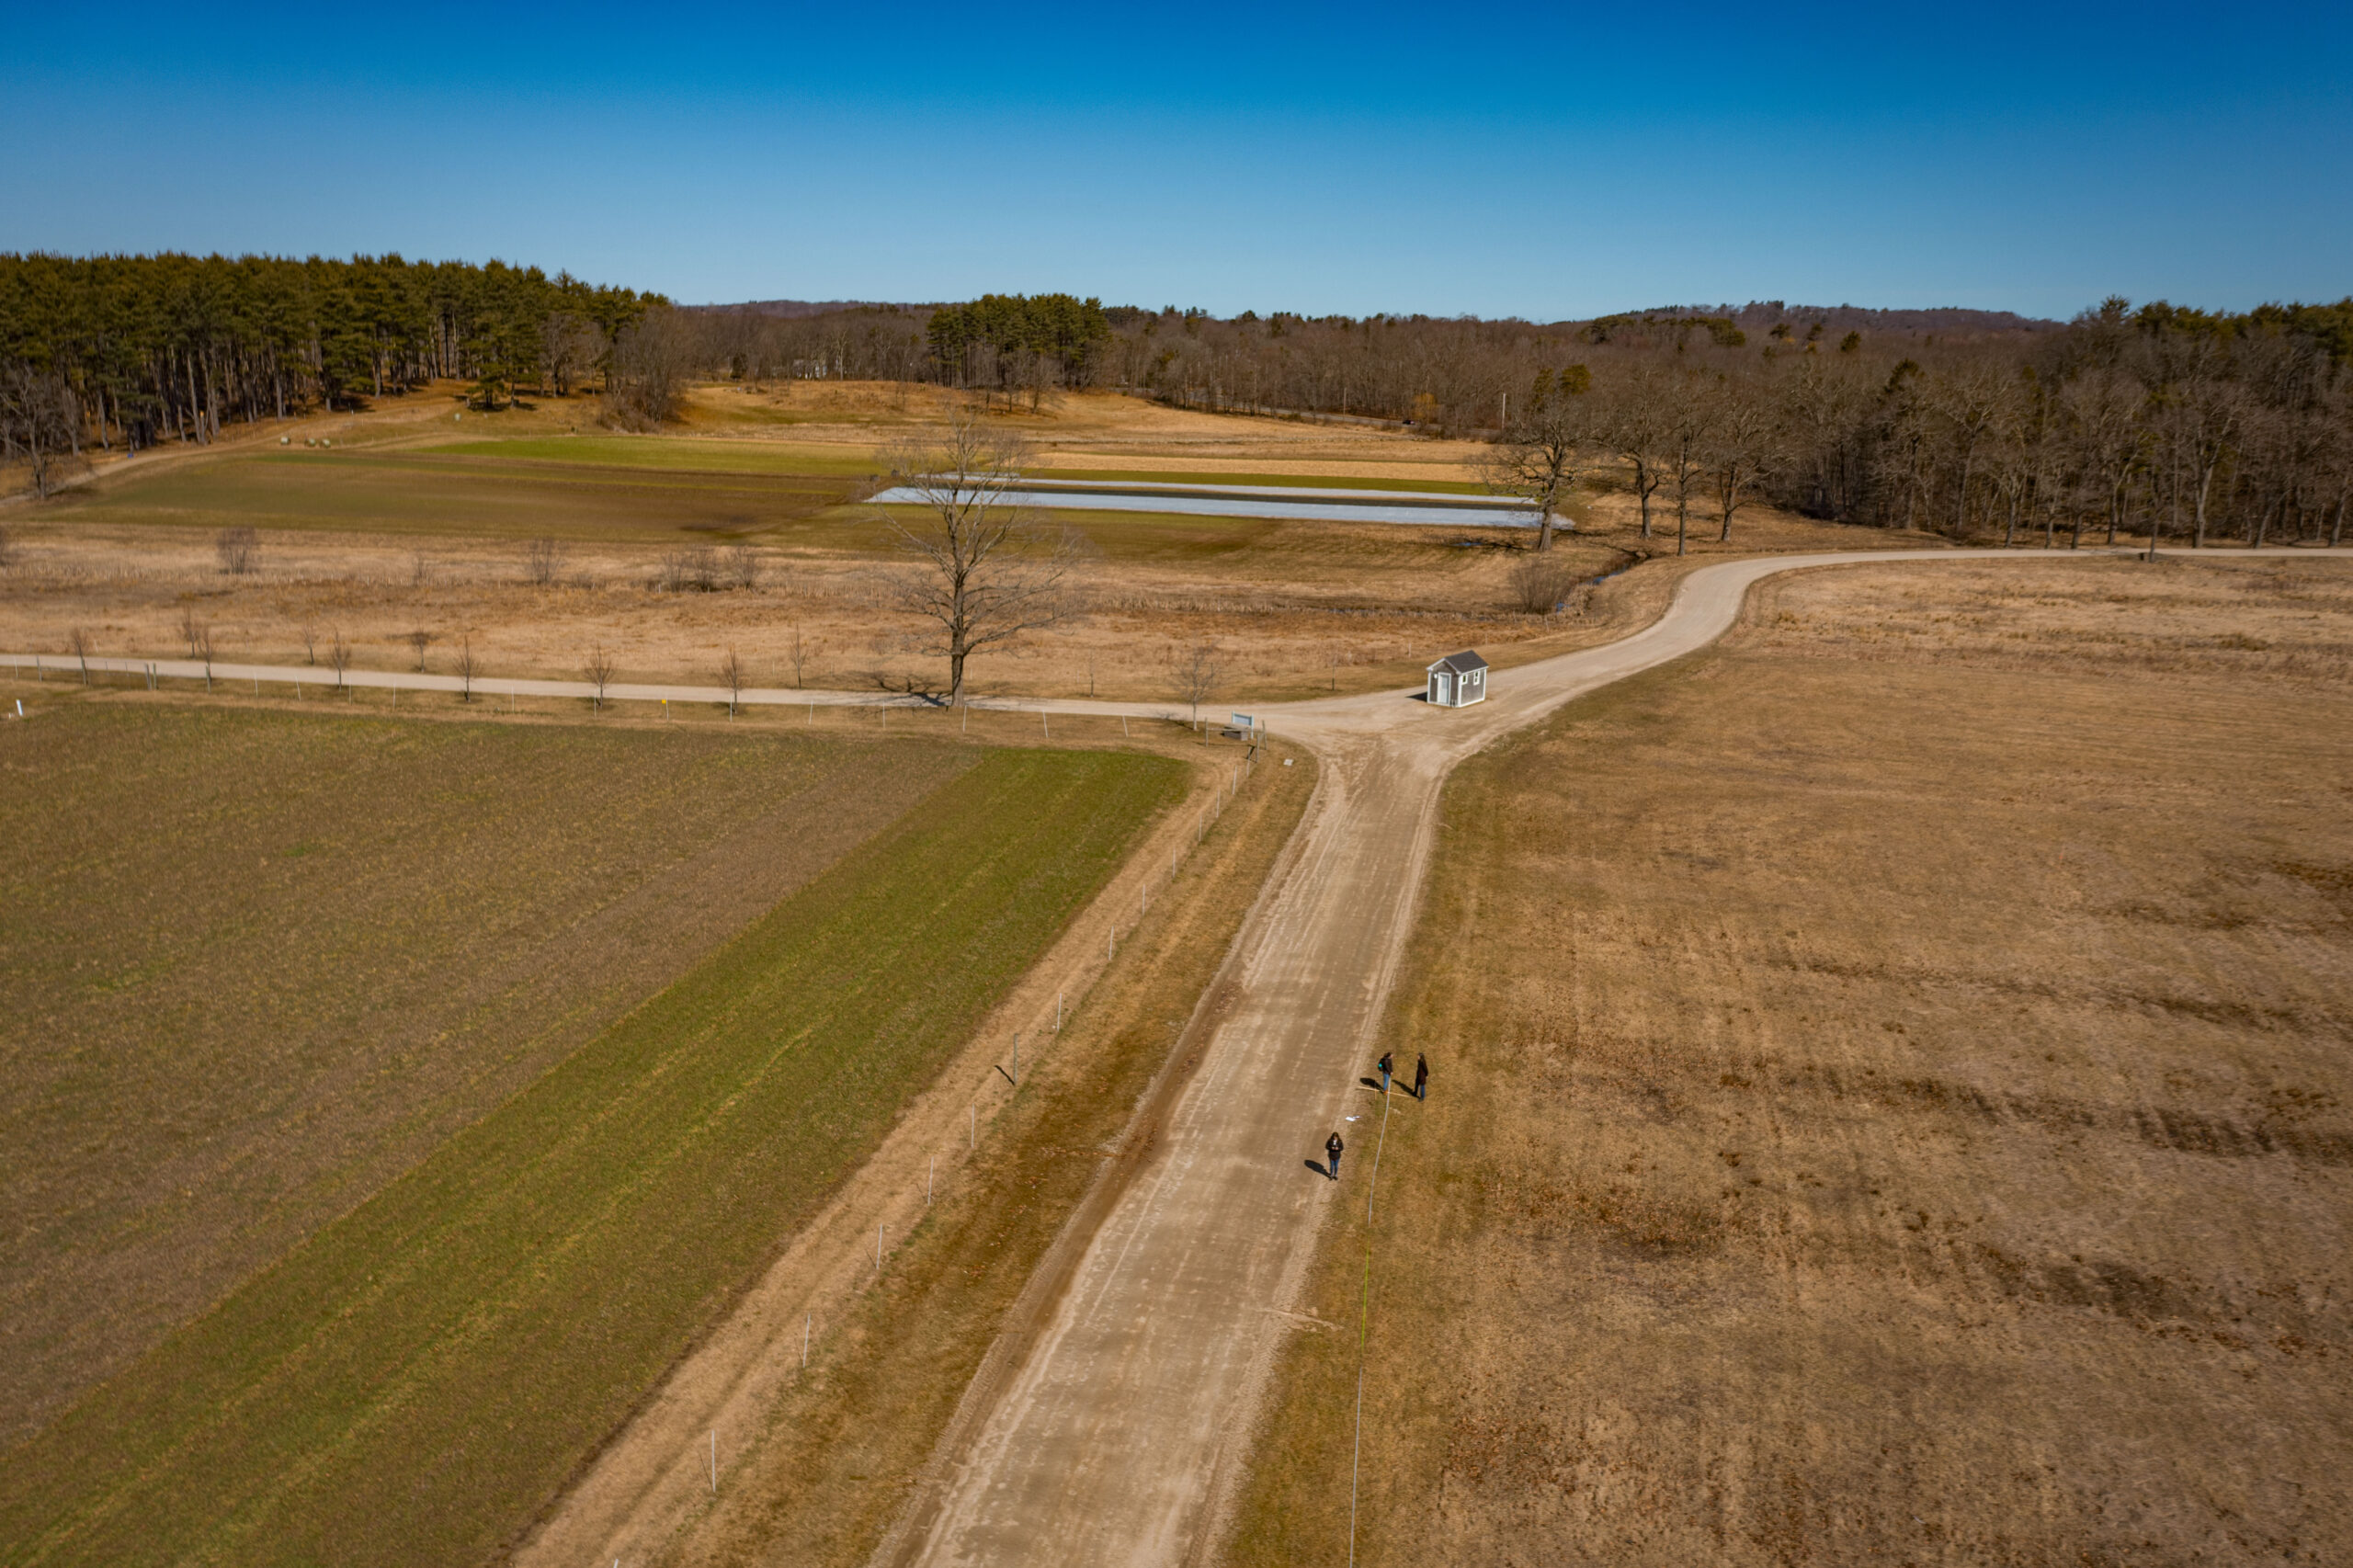 Aerial View of Appleton Farms in March - a road dissects two greenish brown fields.